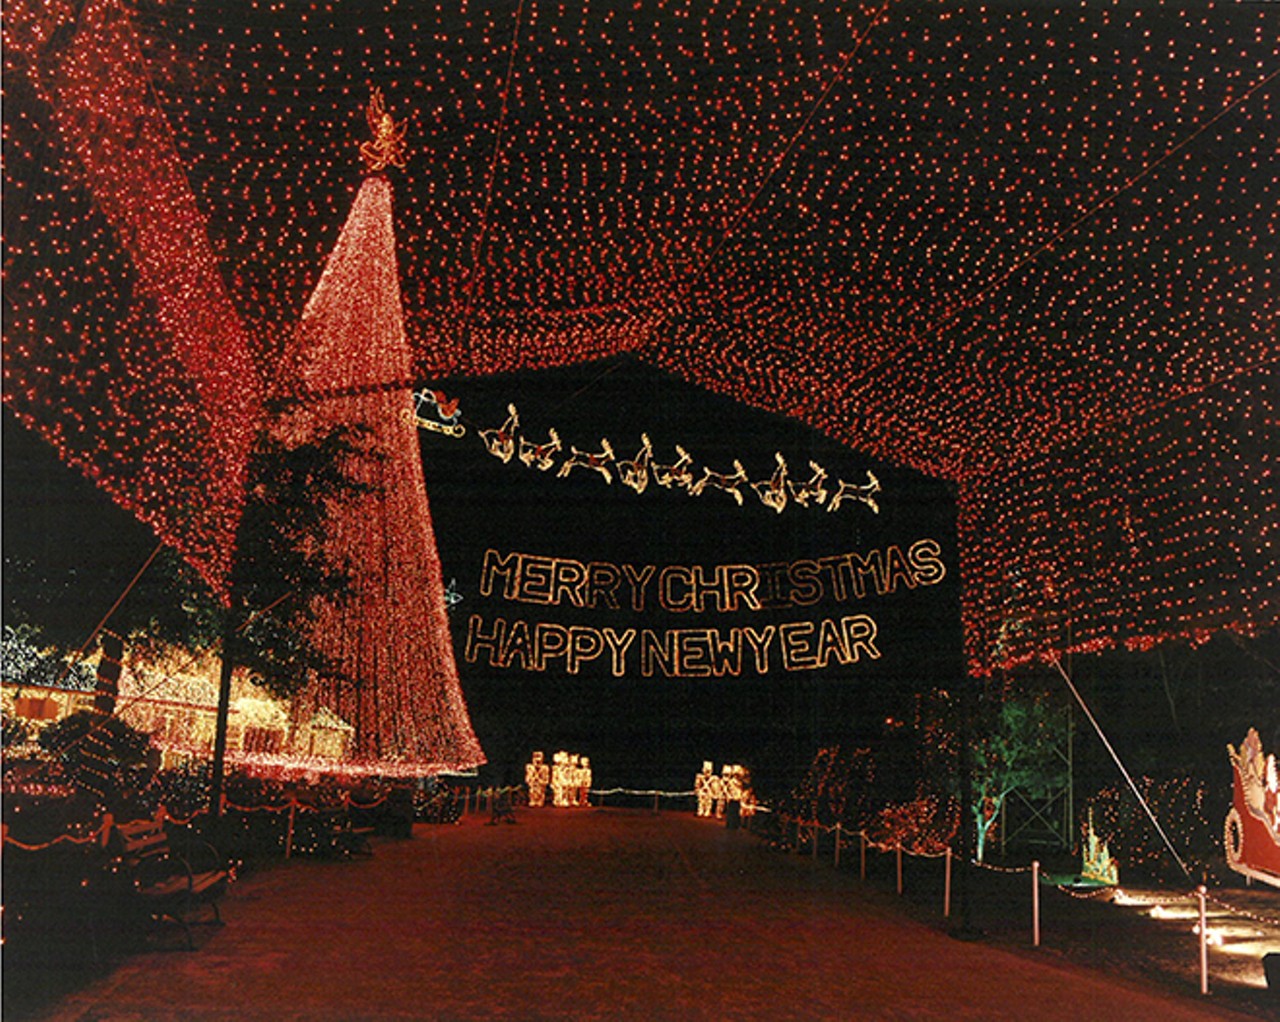 A Christmas canopy formed as part of the Osborne Family Spectacle of Lights. 1996.